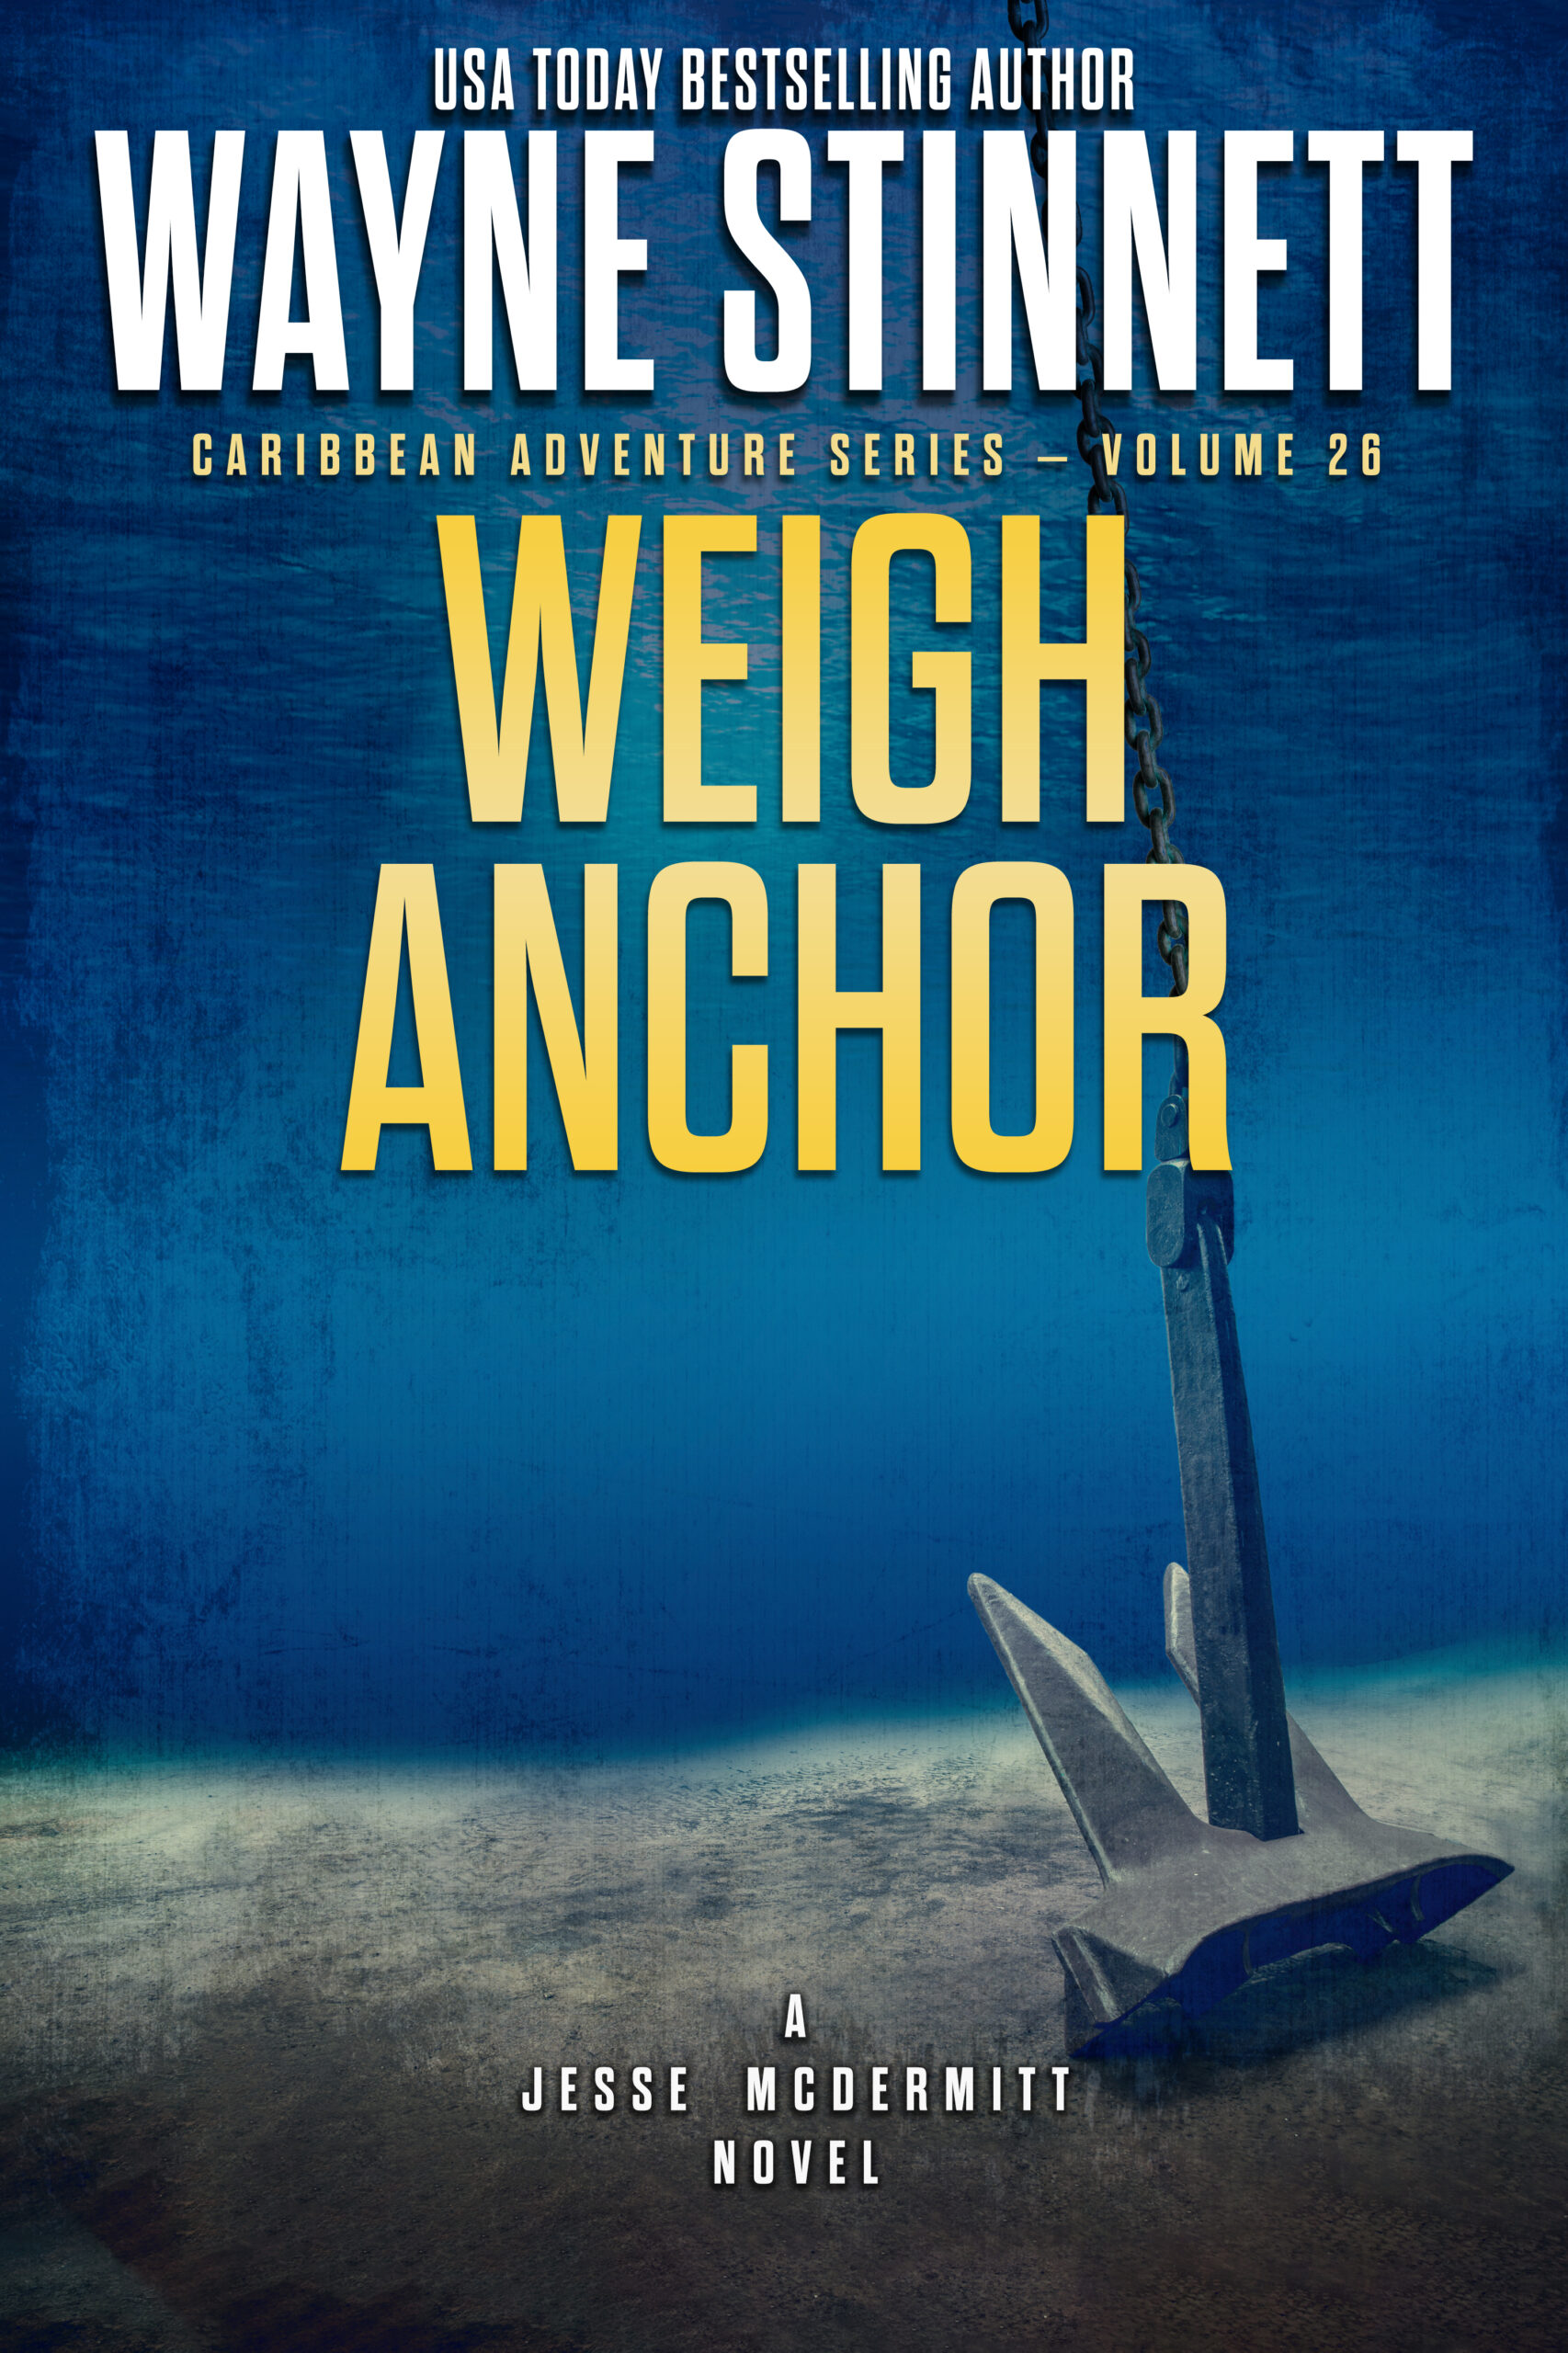 Book Cover of Weigh Anchor by Wayne Stinnett